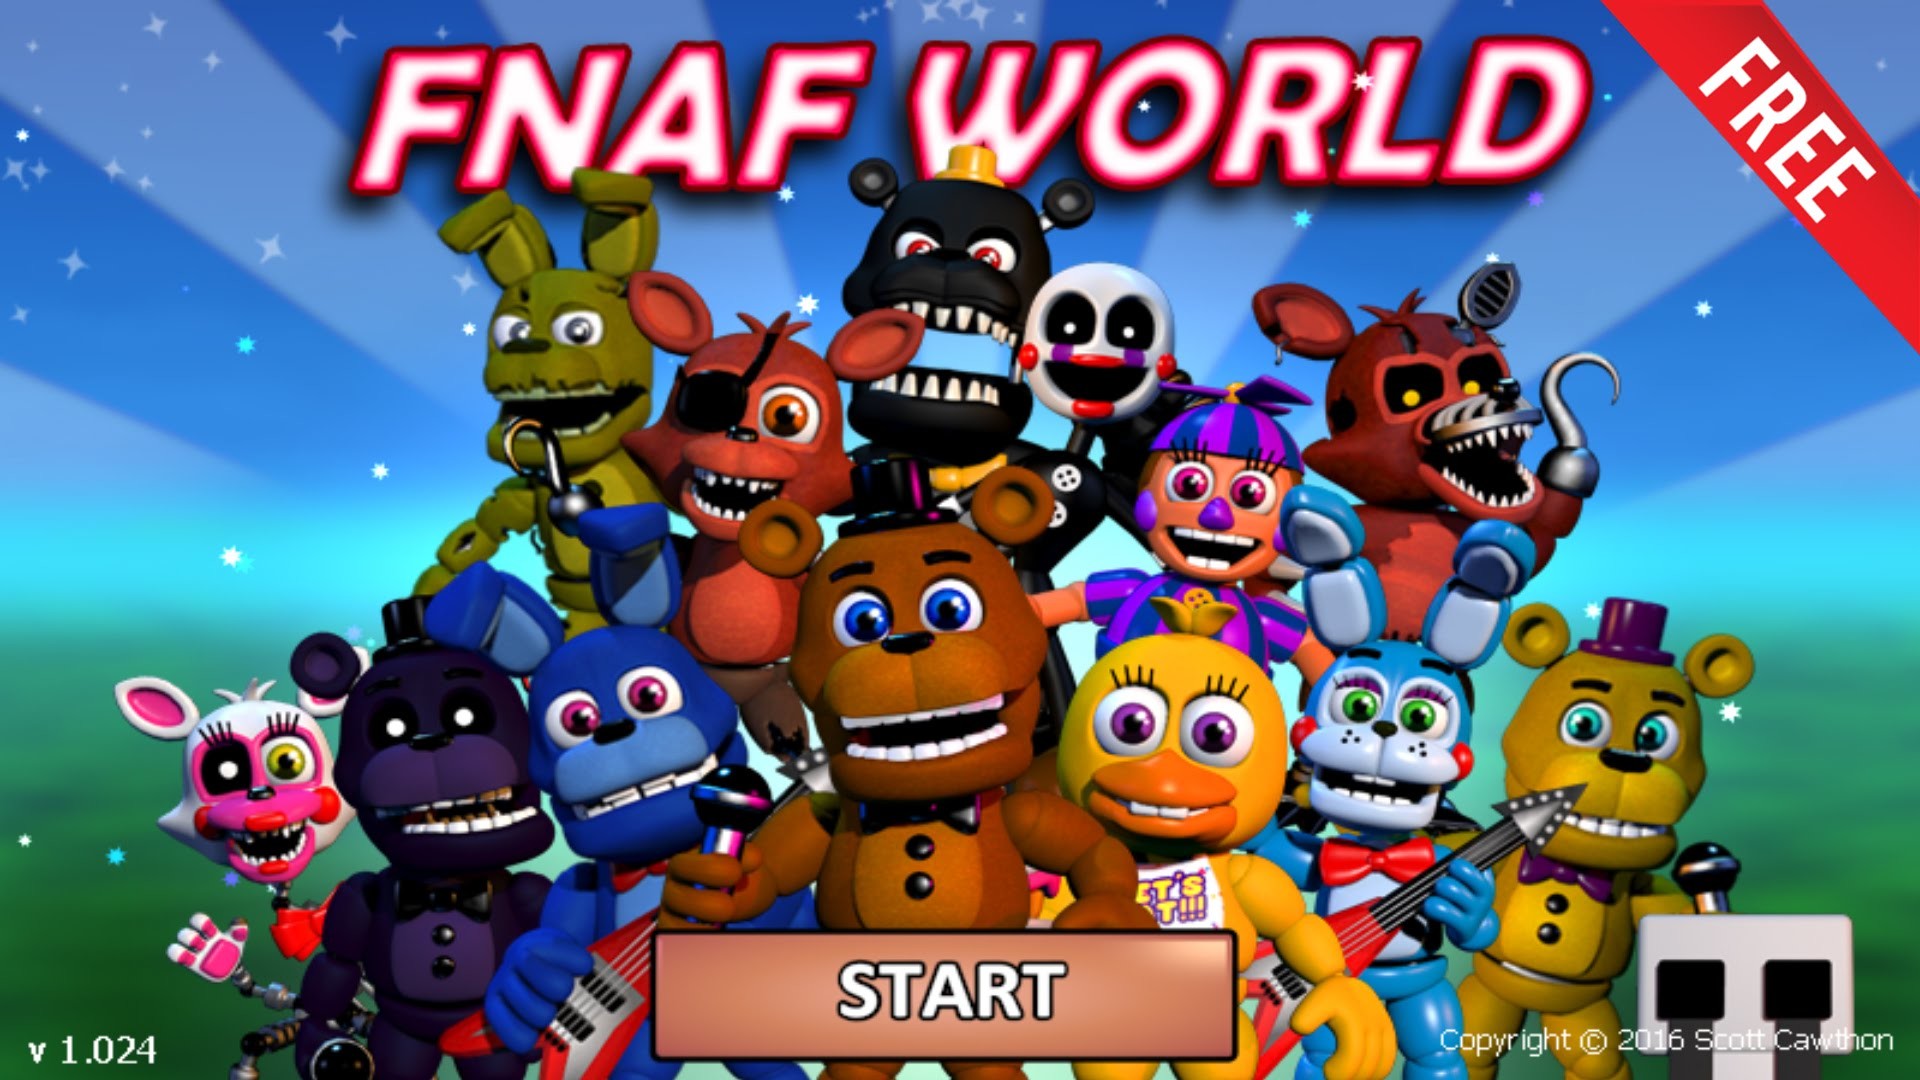 1920x1080 How to get Five Nights at Freddy's World (FNAF World) Free on Steam!